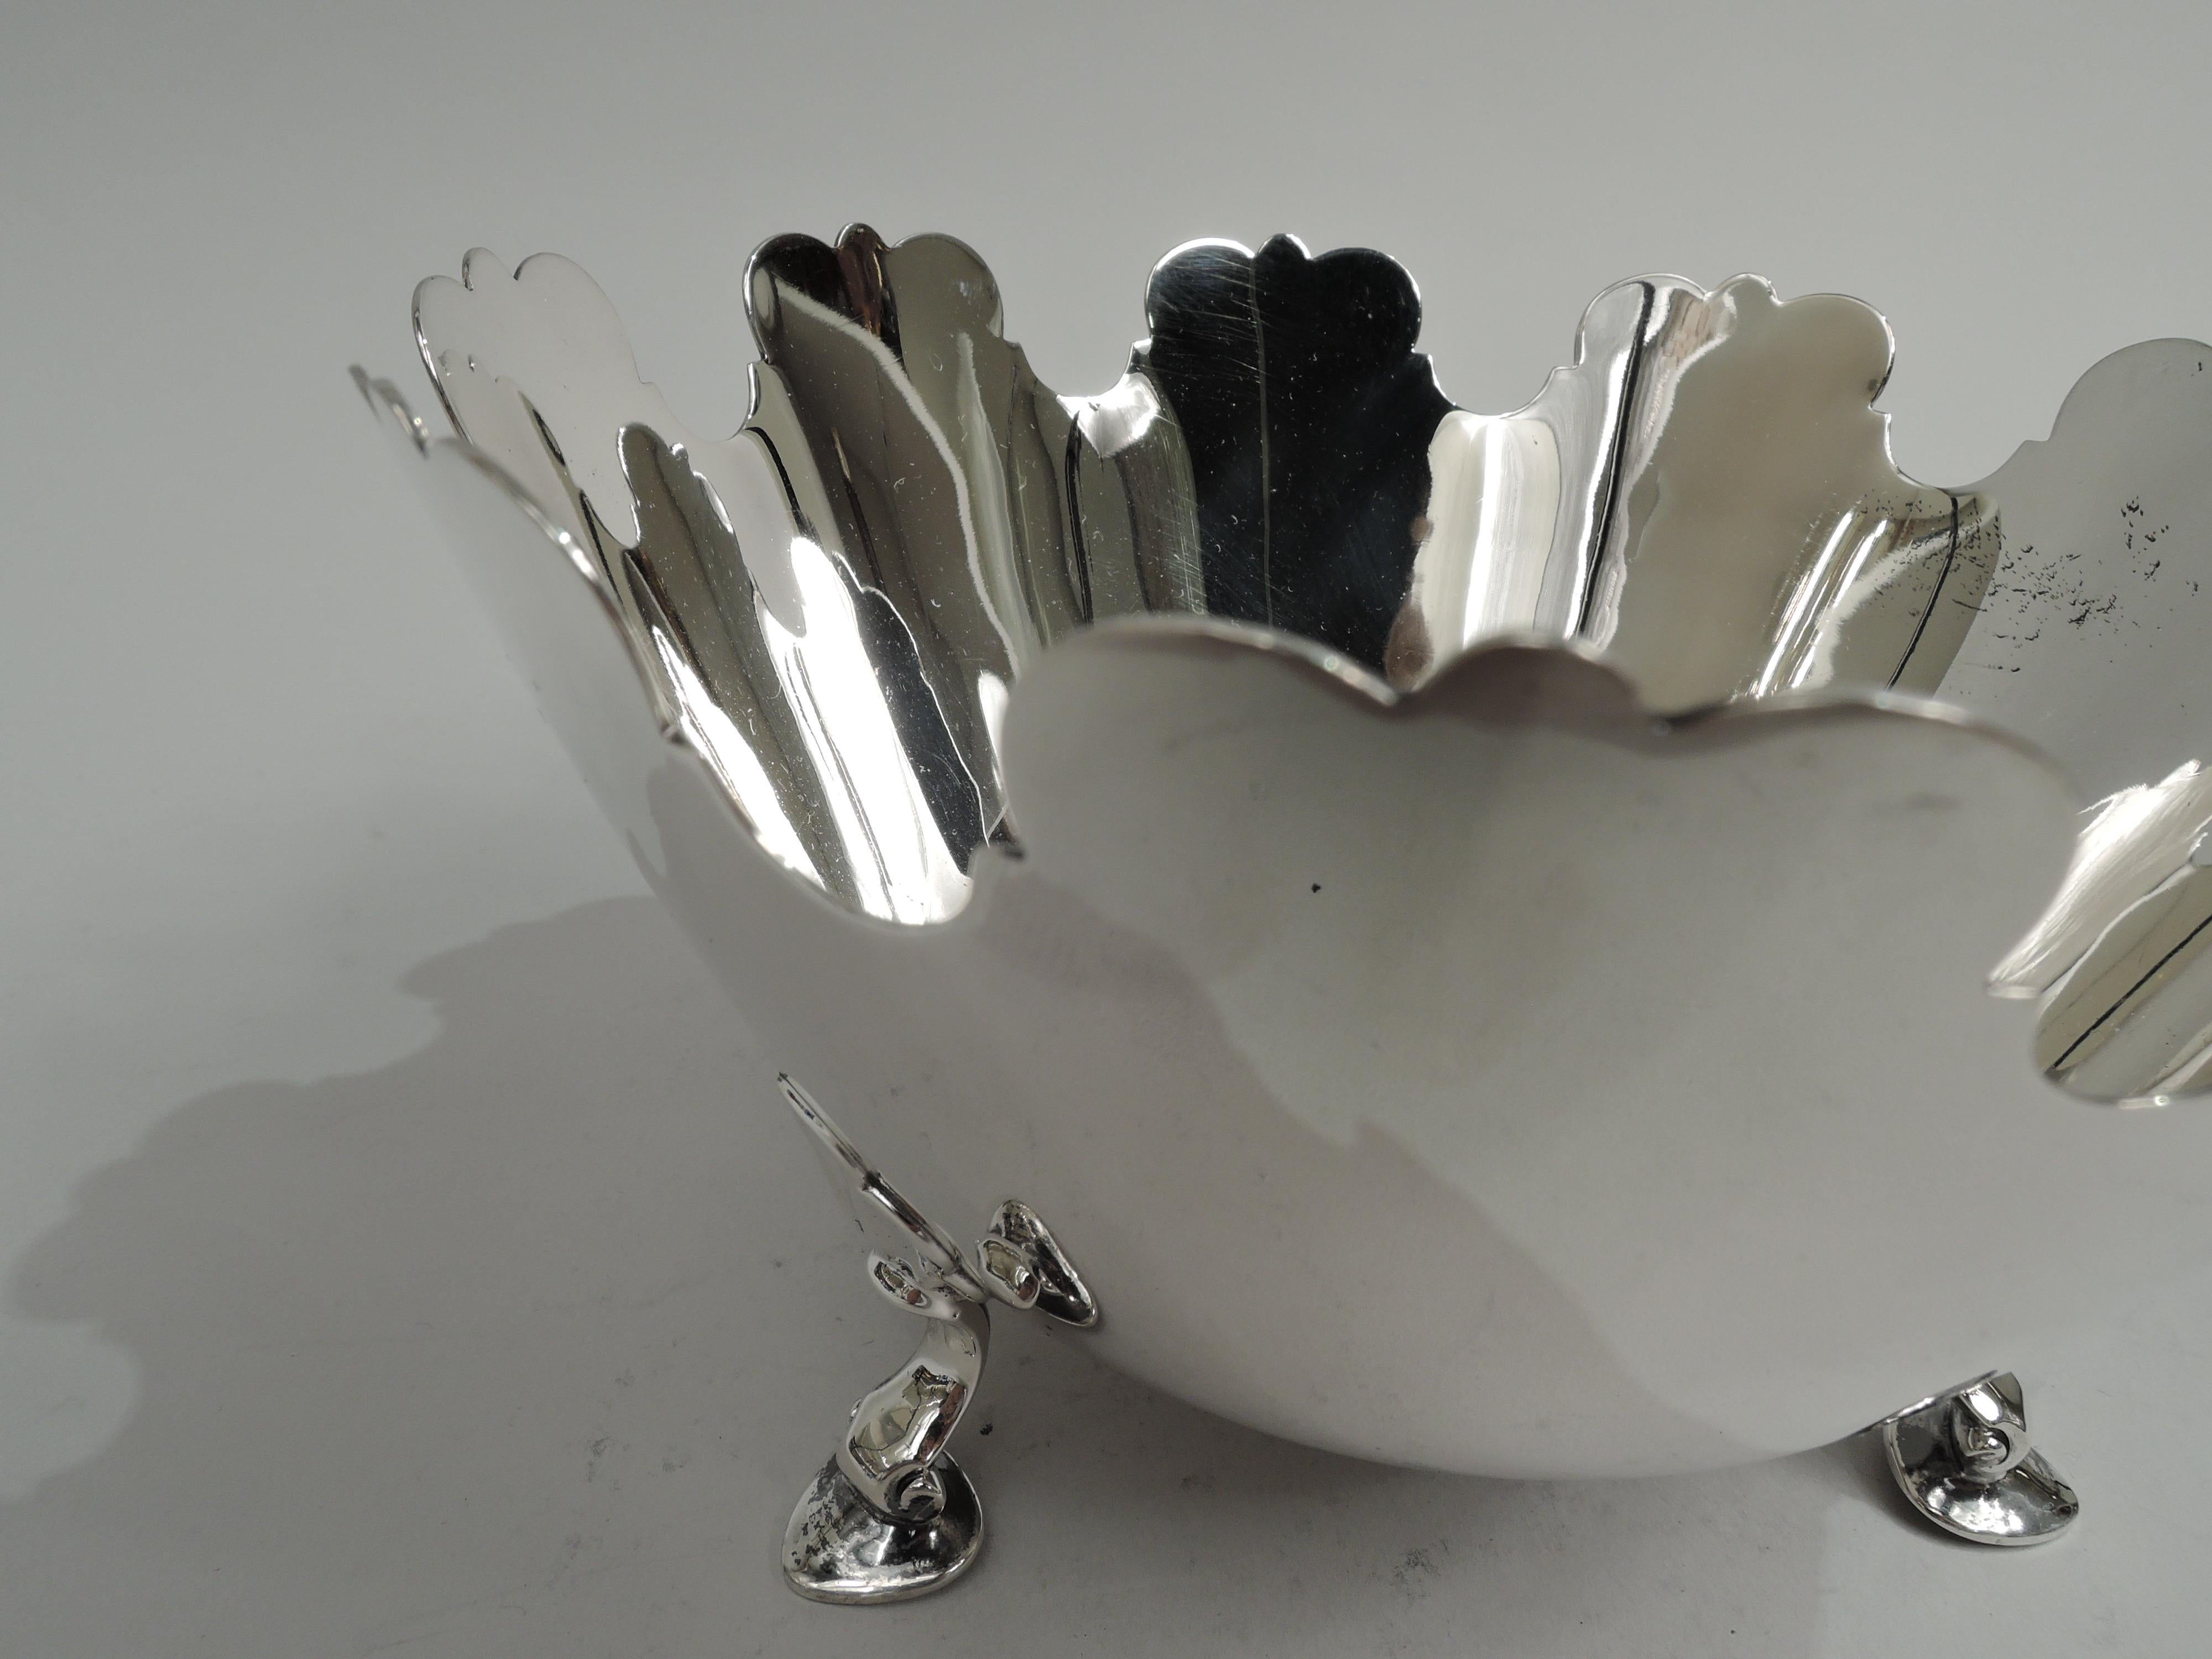 Mid-Century Modern sterling silver bowl. Made by Tiffany & Co. in New York. Tapering sides and curved bottom on stylized leaf-mounted hoof supports. Monteith-style rim with alternating trefoils and curvilinear dips. Fully marked including maker’s